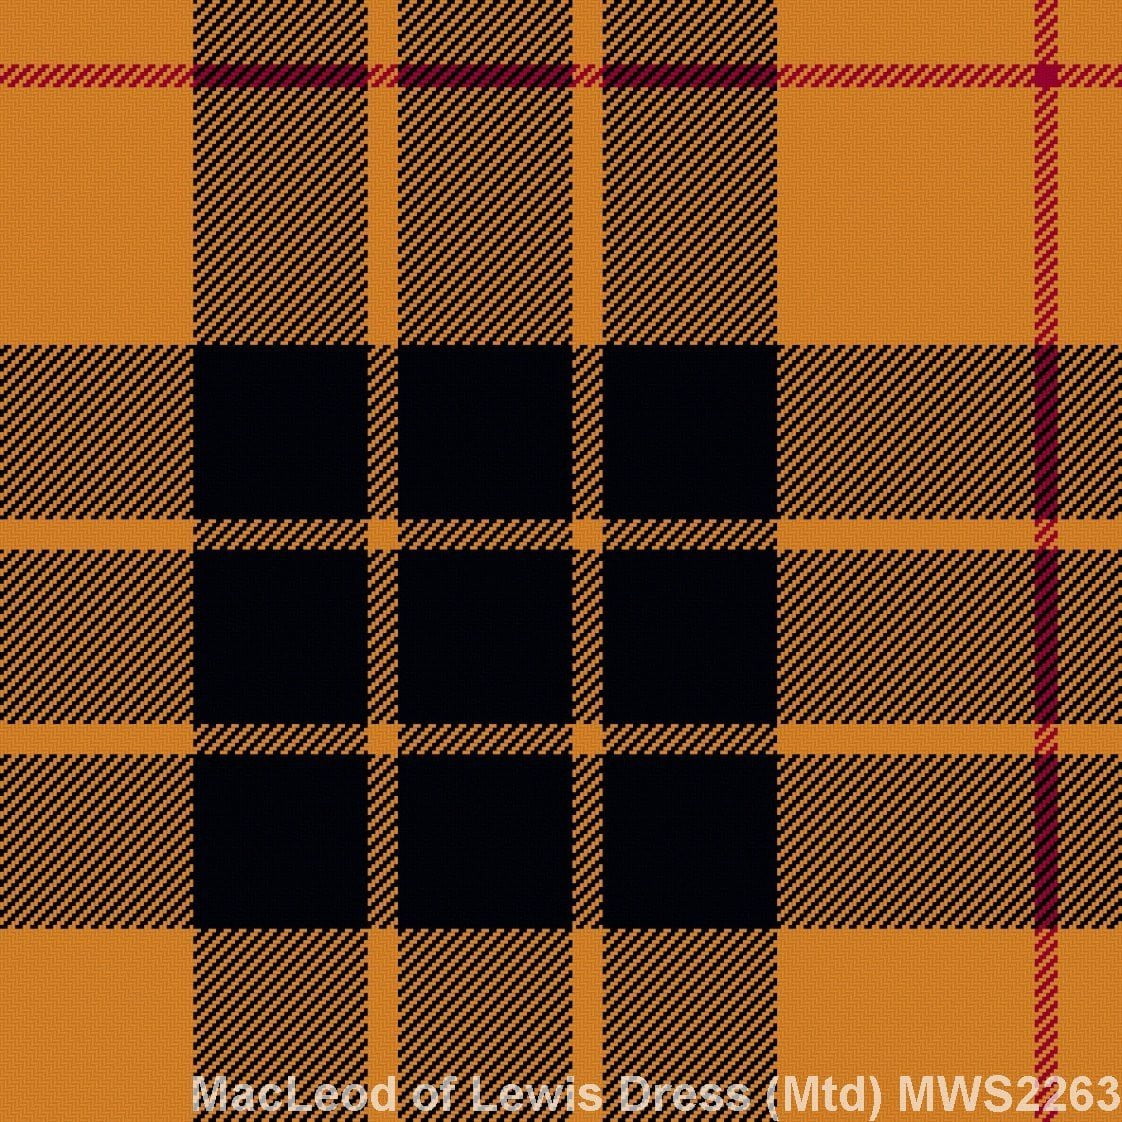 MacLeod of Lewis Dress Muted